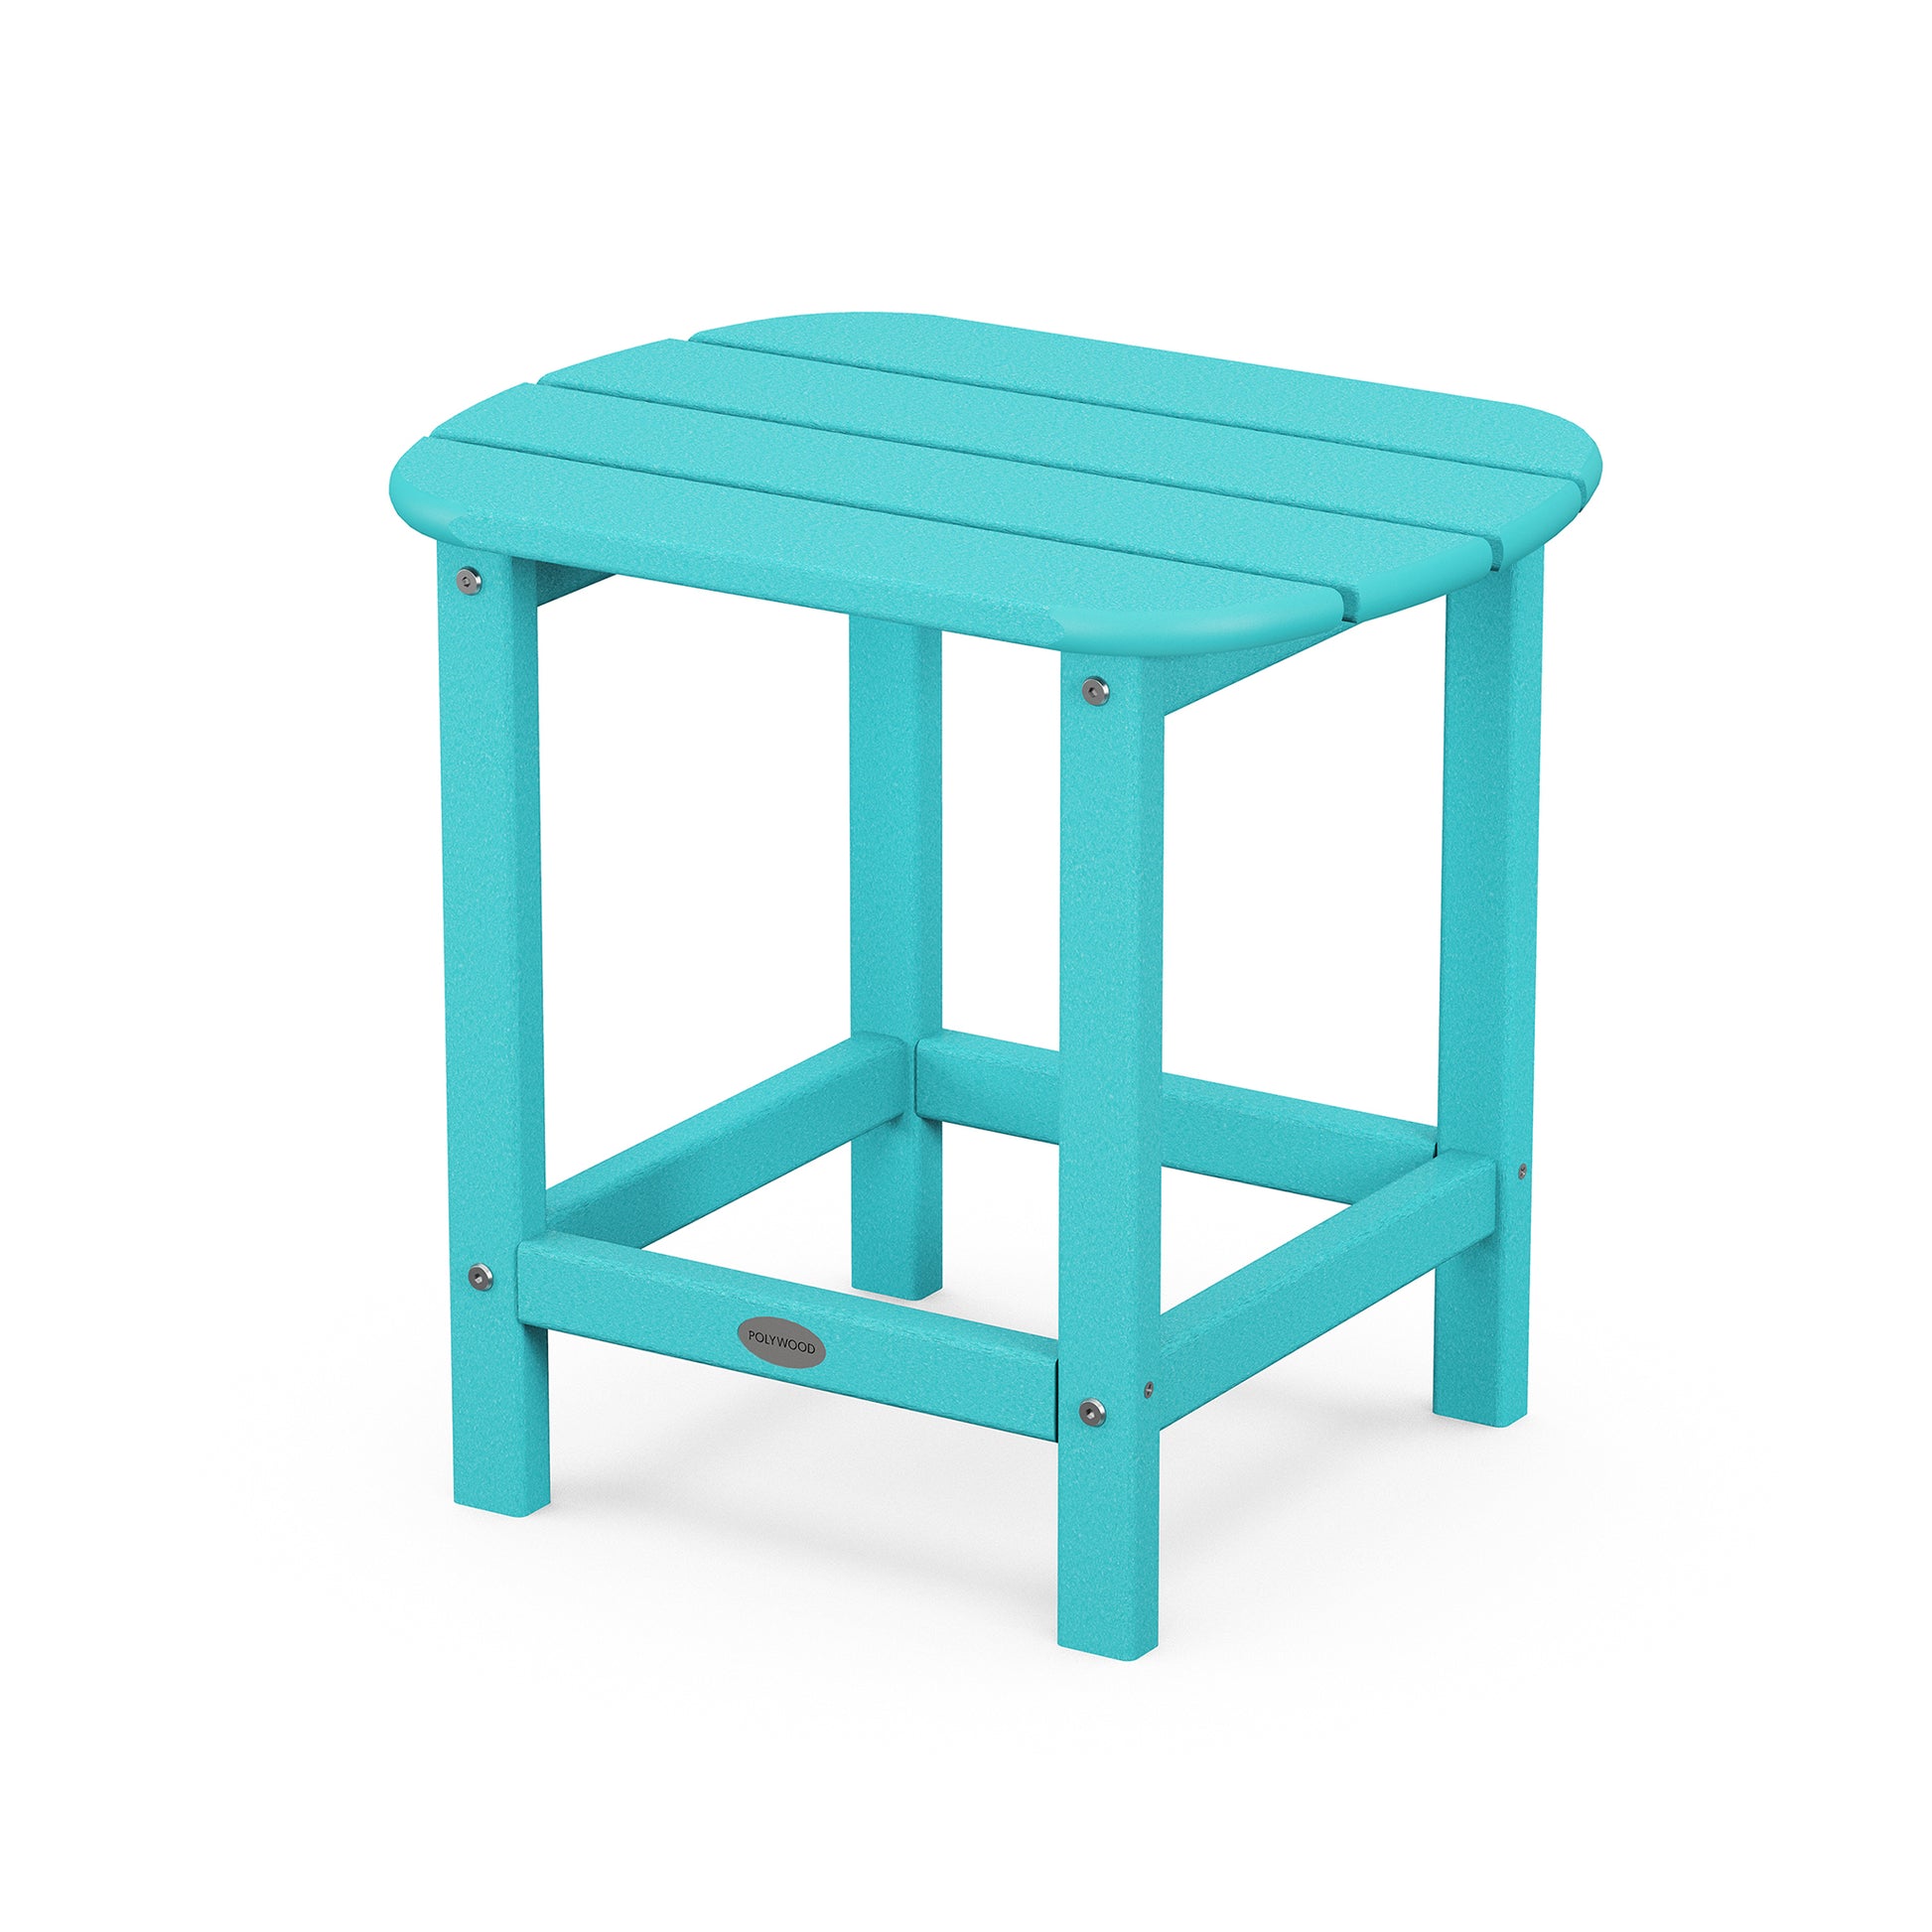 A turquoise blue POLYWOOD® South Beach Adirondack 18" Side Table with a rectangular top and four legs, isolated on a white background. The table has visible screws at the joints.